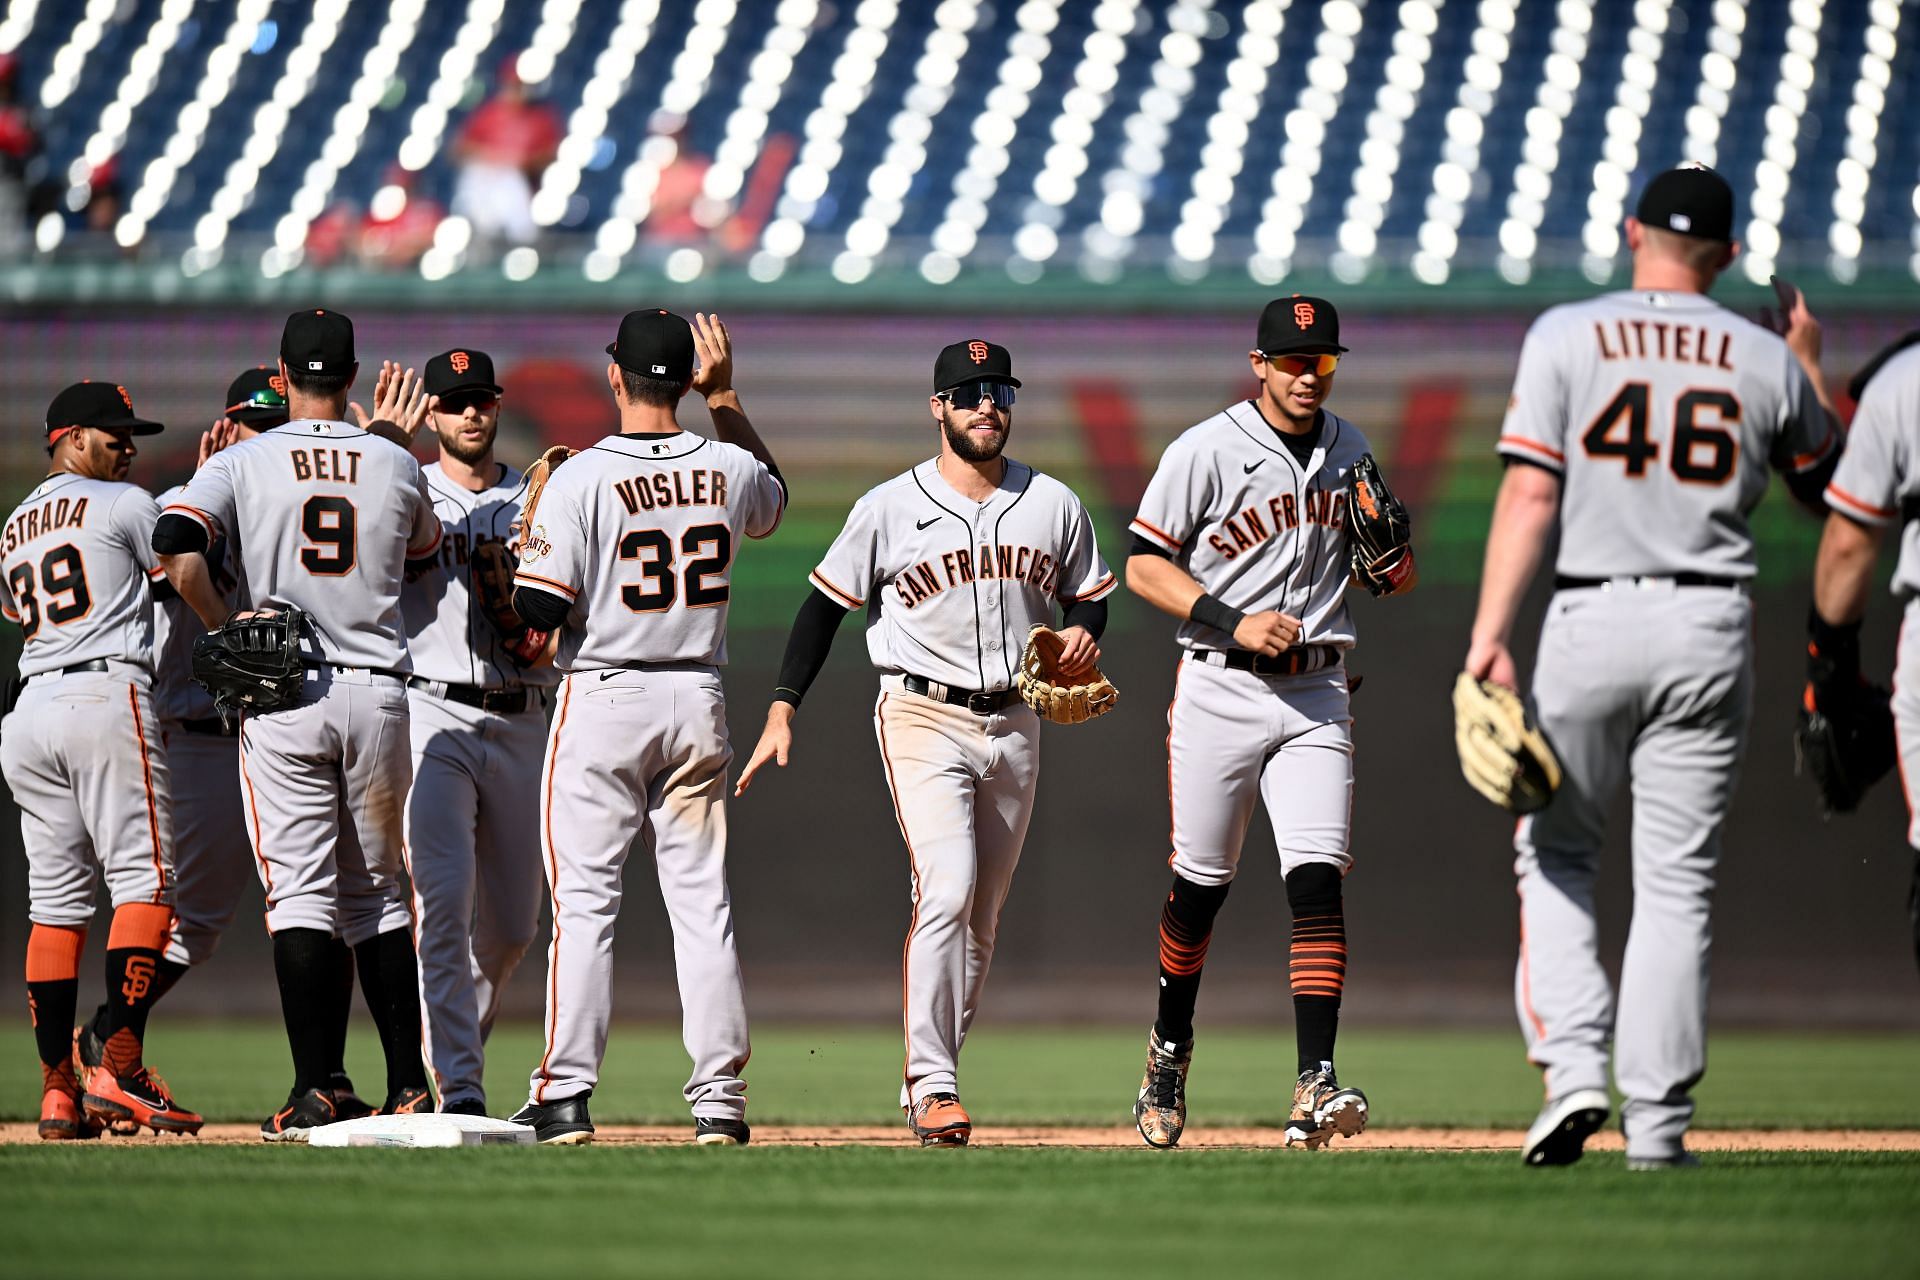 The San Francisco Giants celebrate after a 12-3 victory against the Washington Nationals